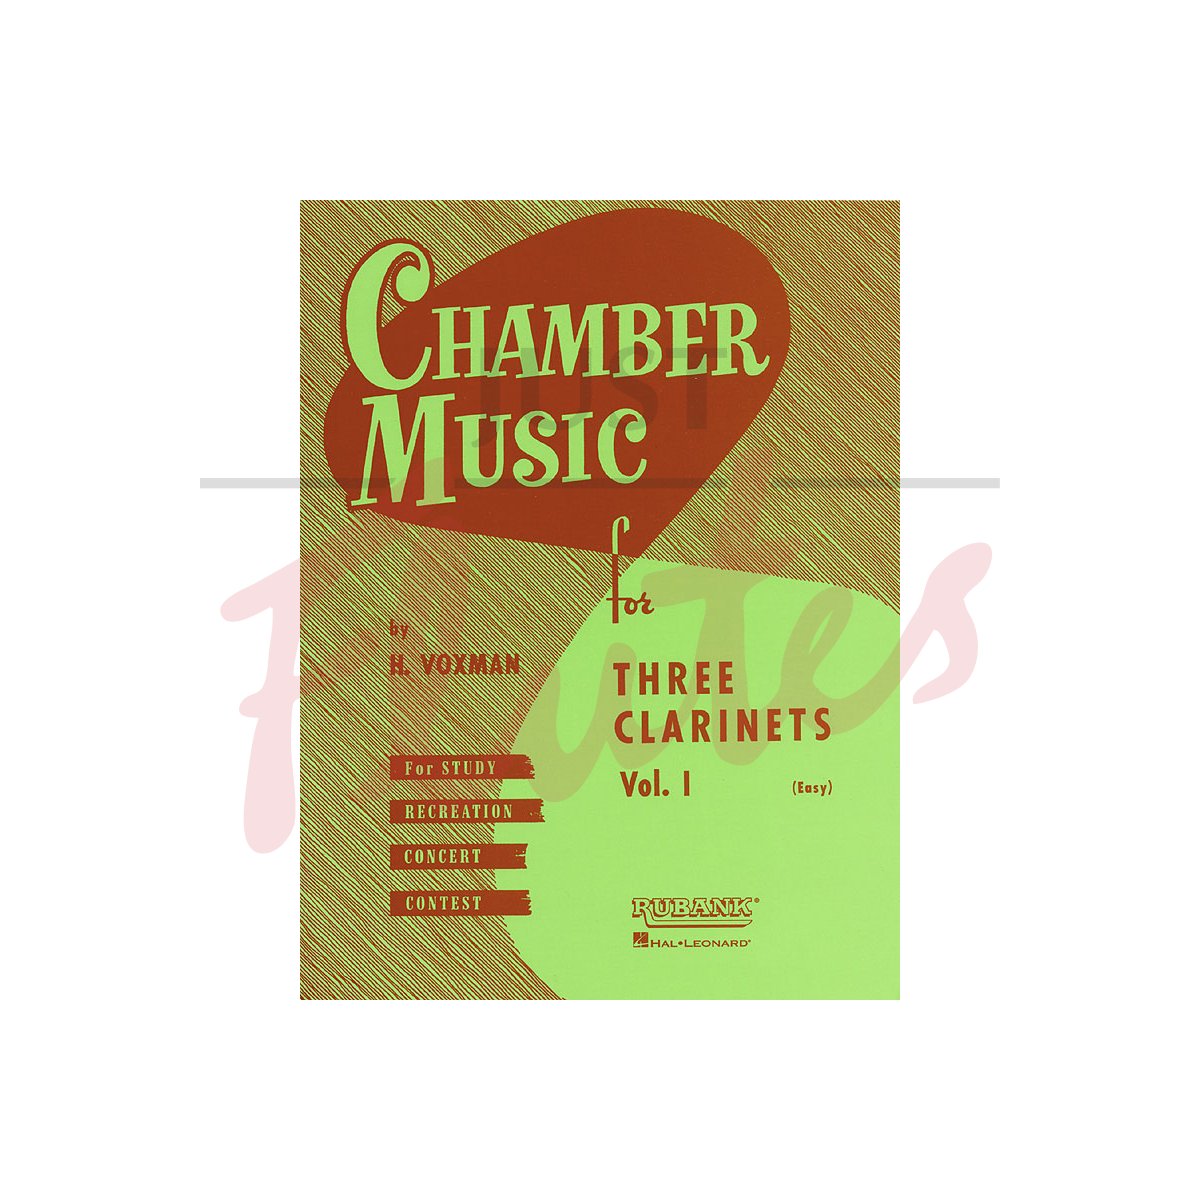 Chamber Music for Three Clarinets, Vol 1 (Easy)